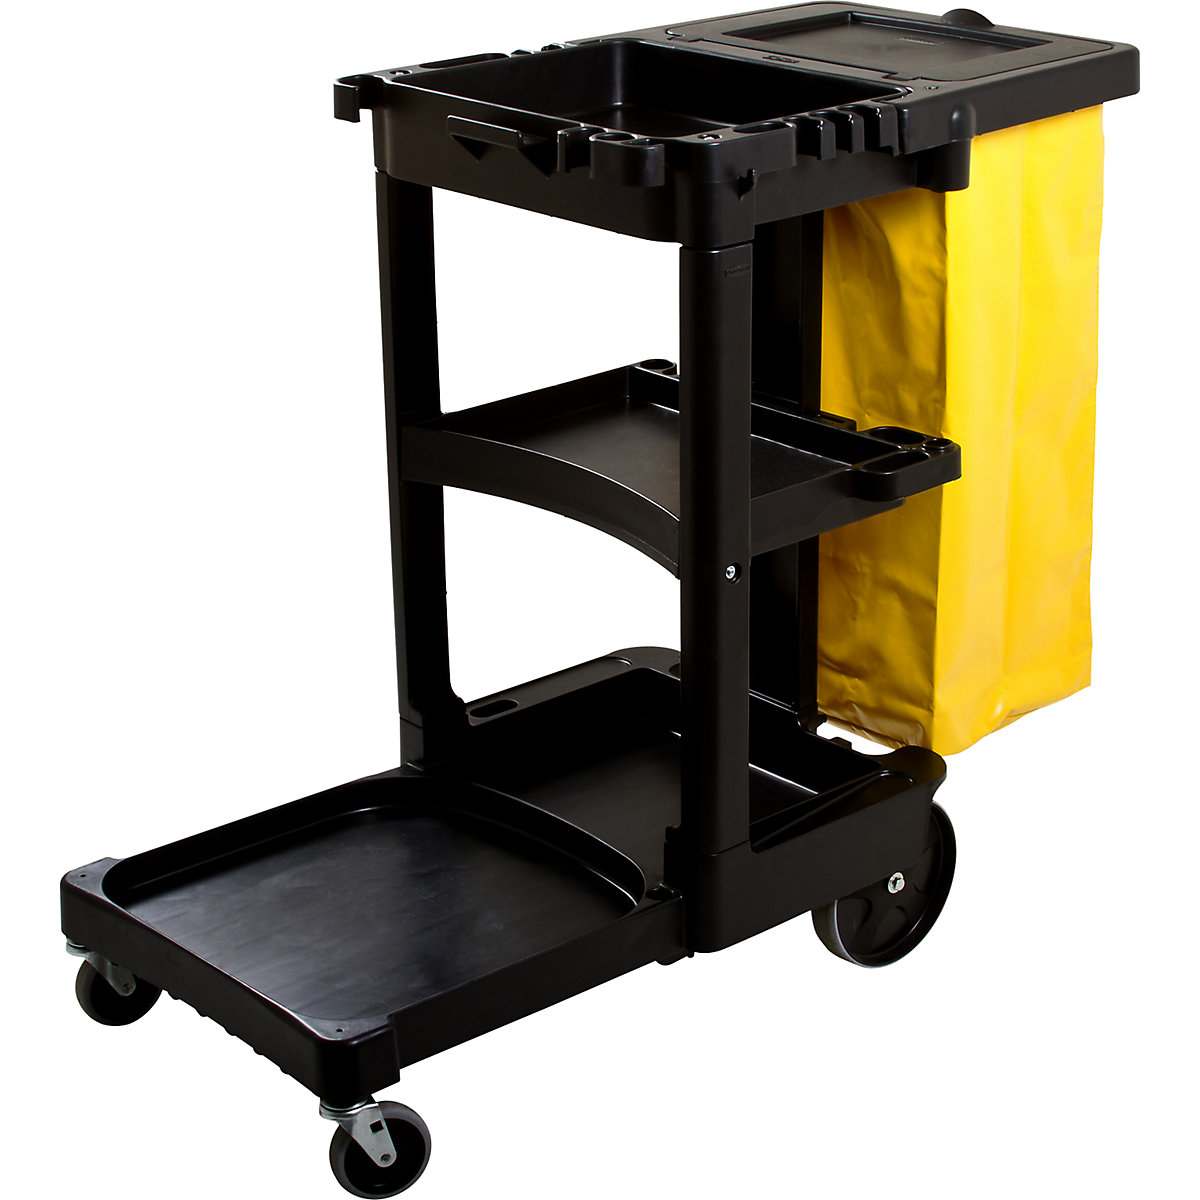 Cleaning trolley – Rubbermaid